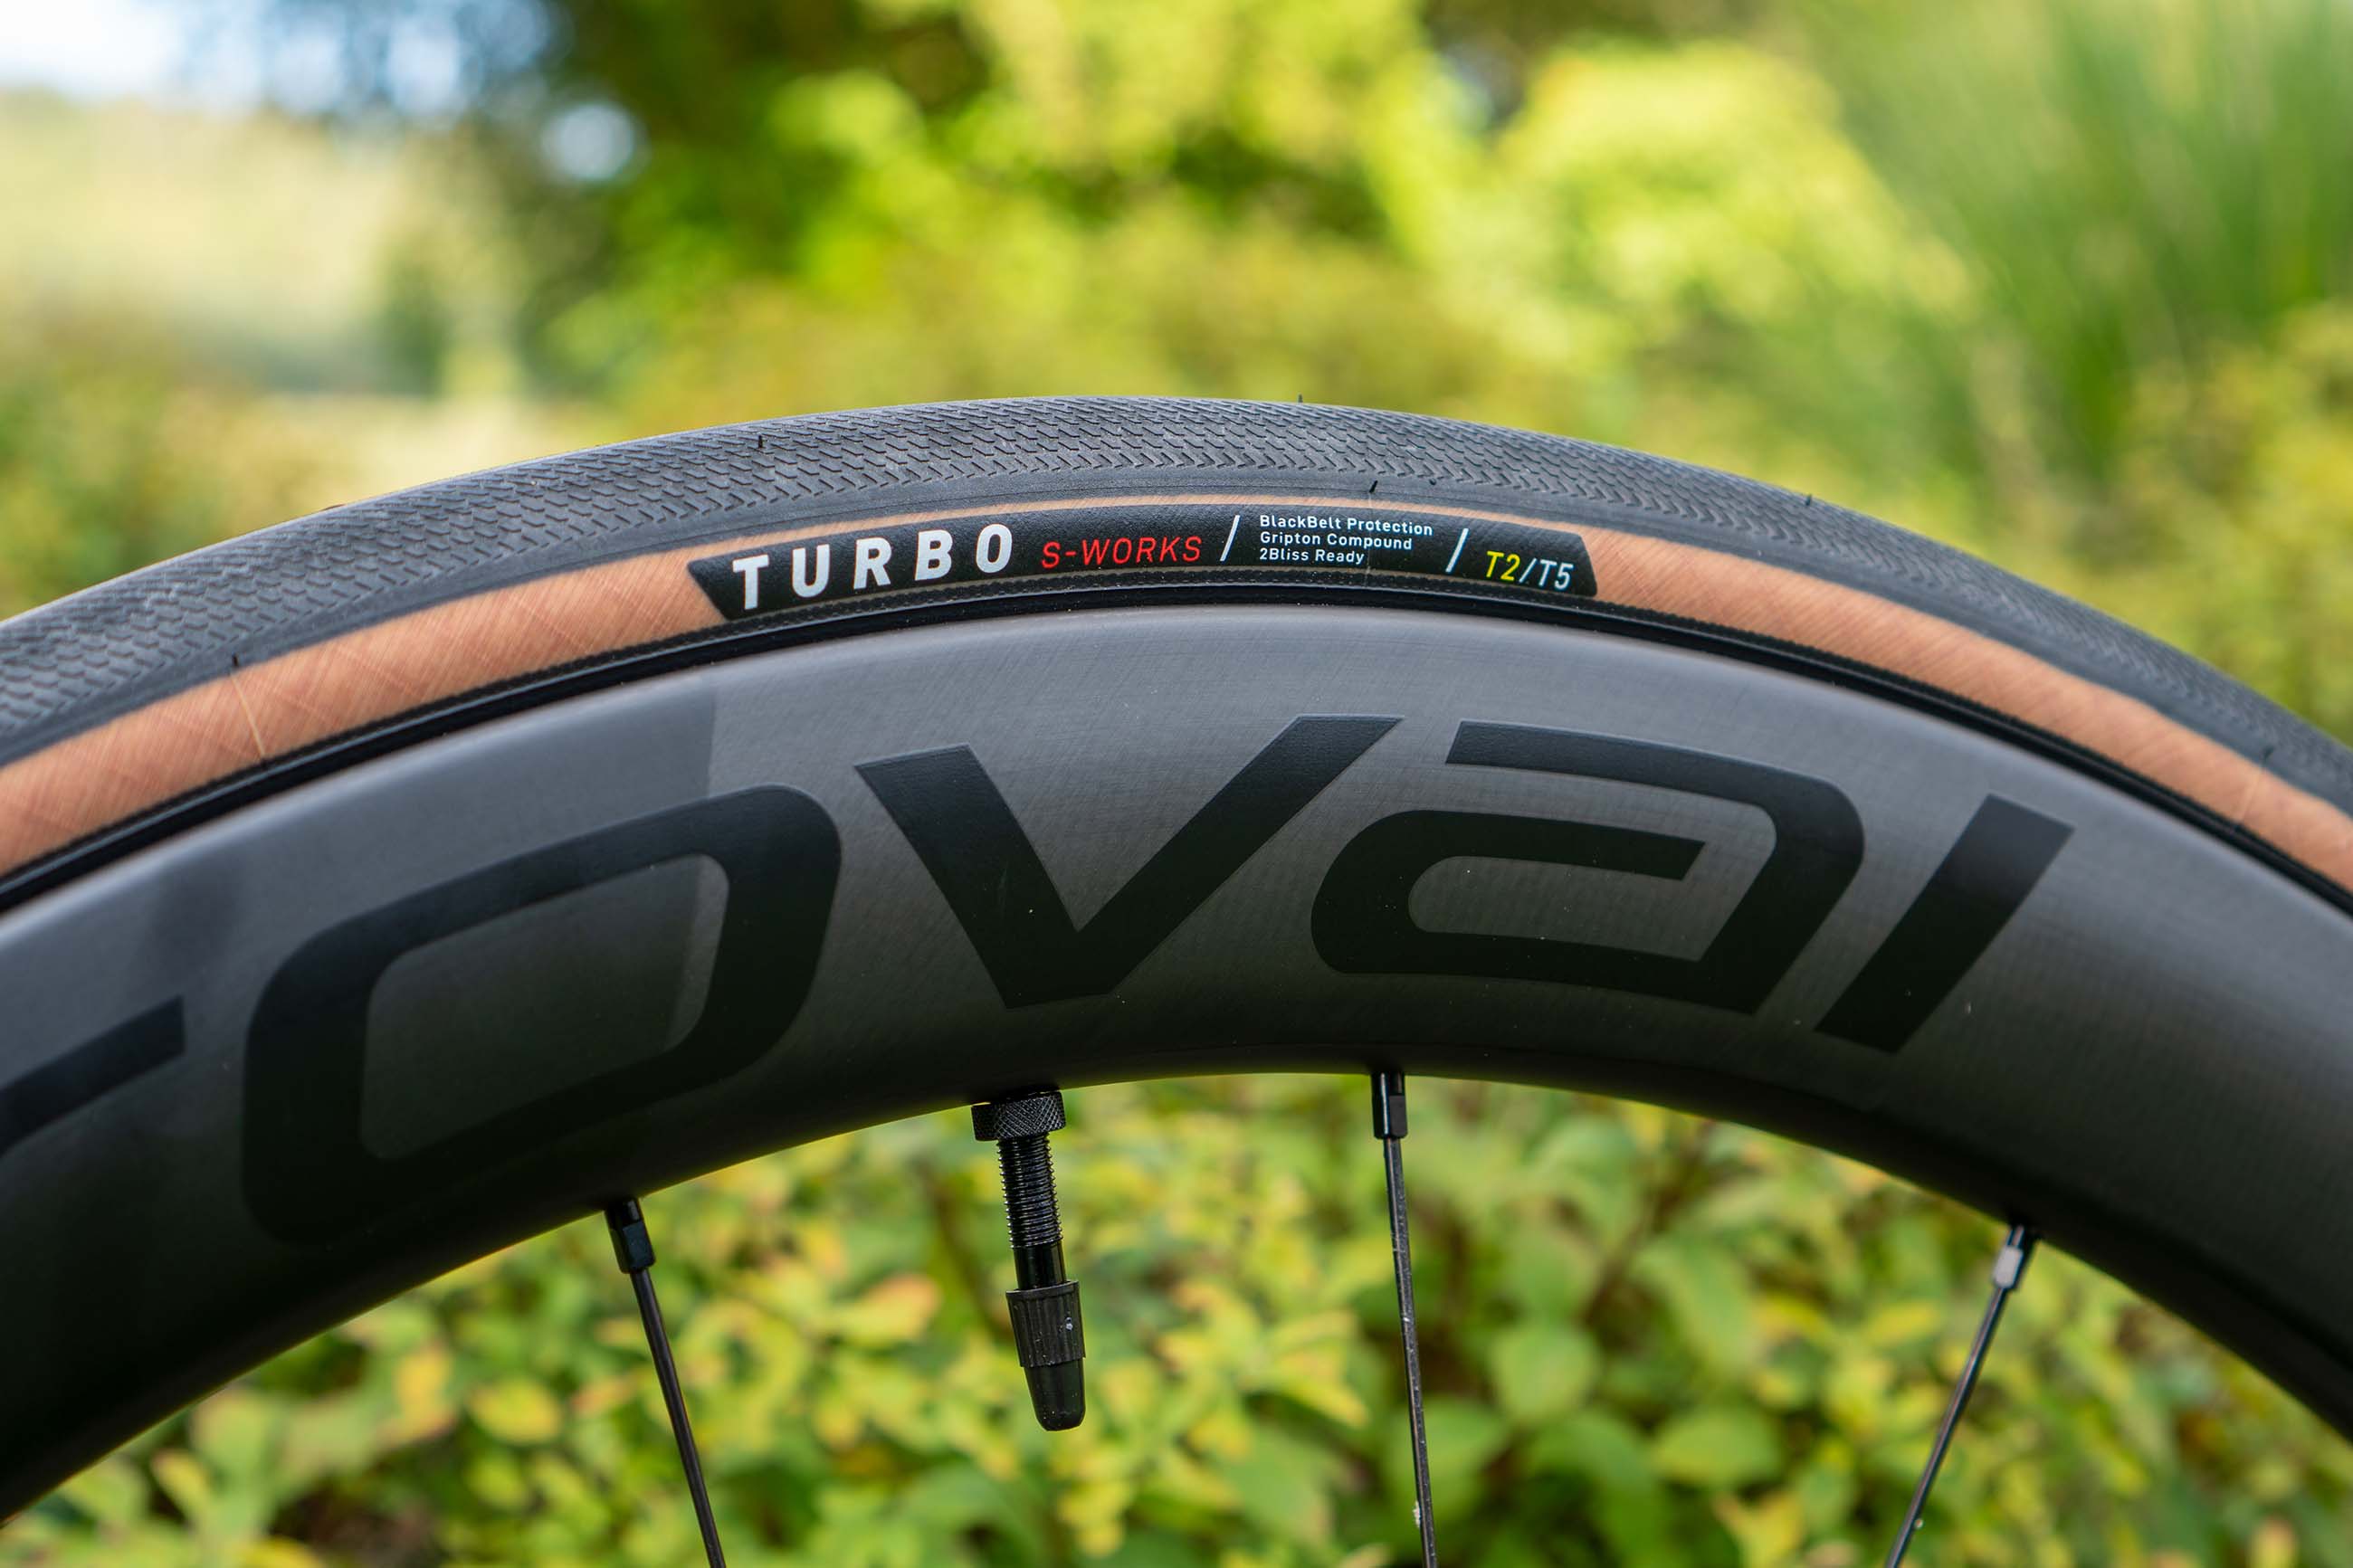 Specialized returns to tubeless with its new S-Works Turbo tyre